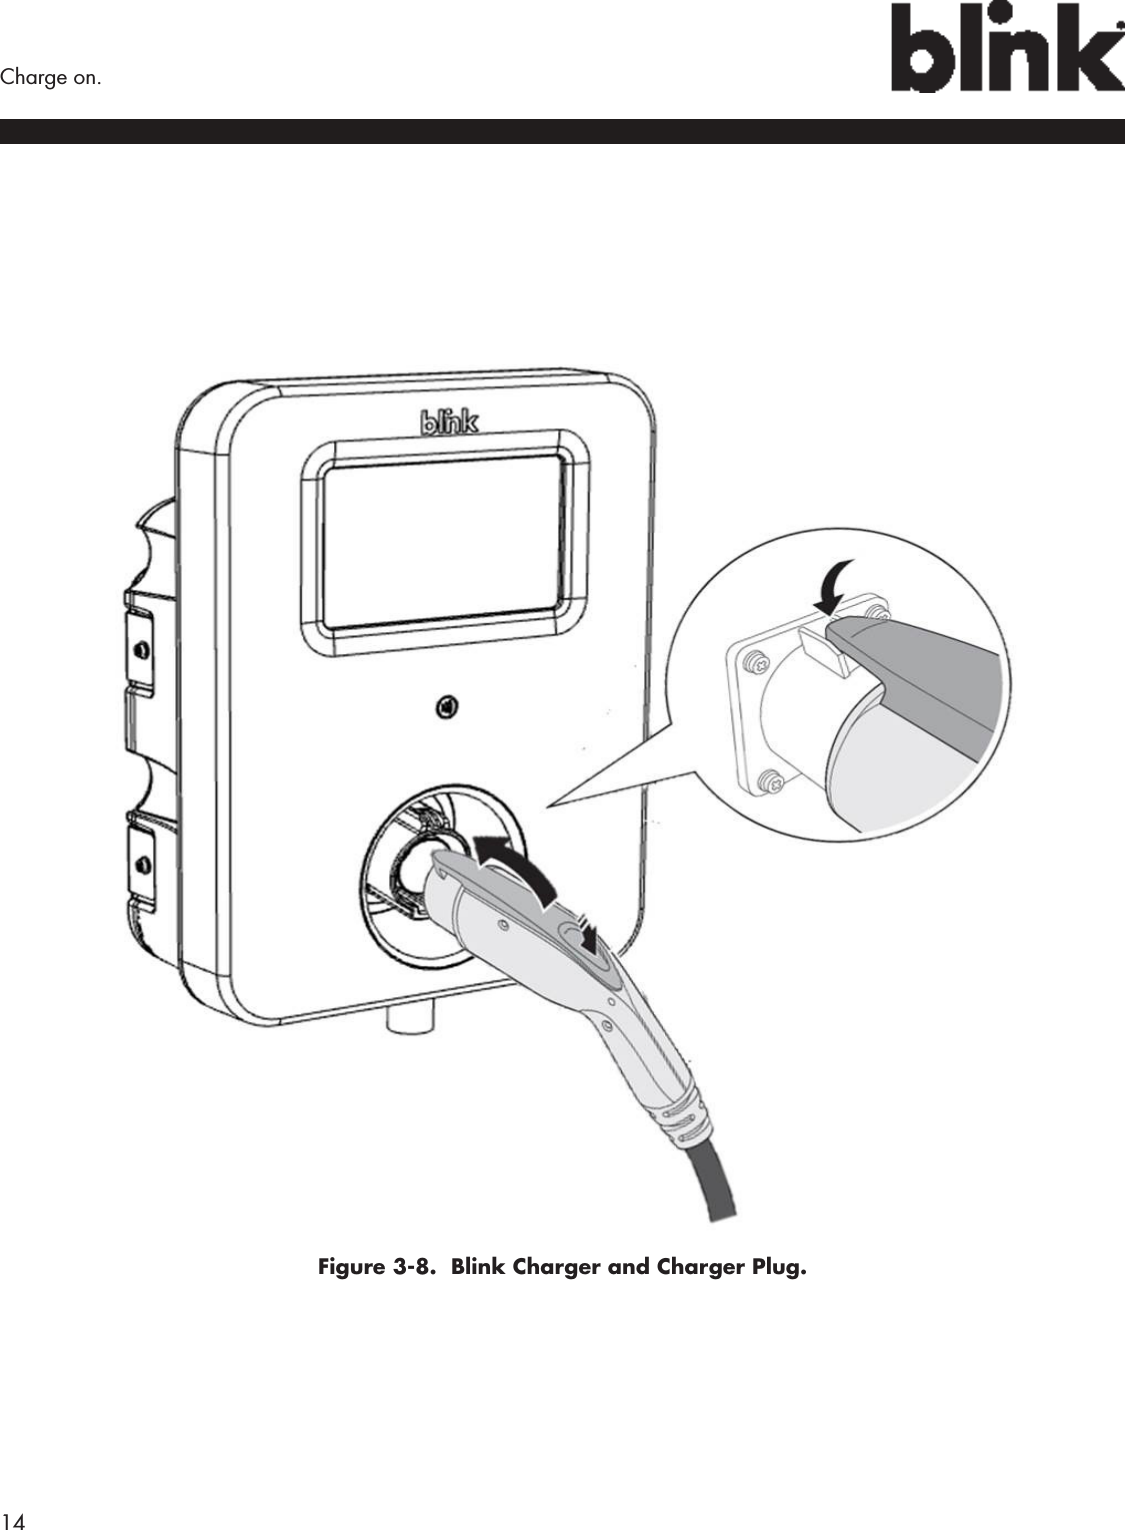 14  Charge on.Figure 3-8.  Blink Charger and Charger Plug.